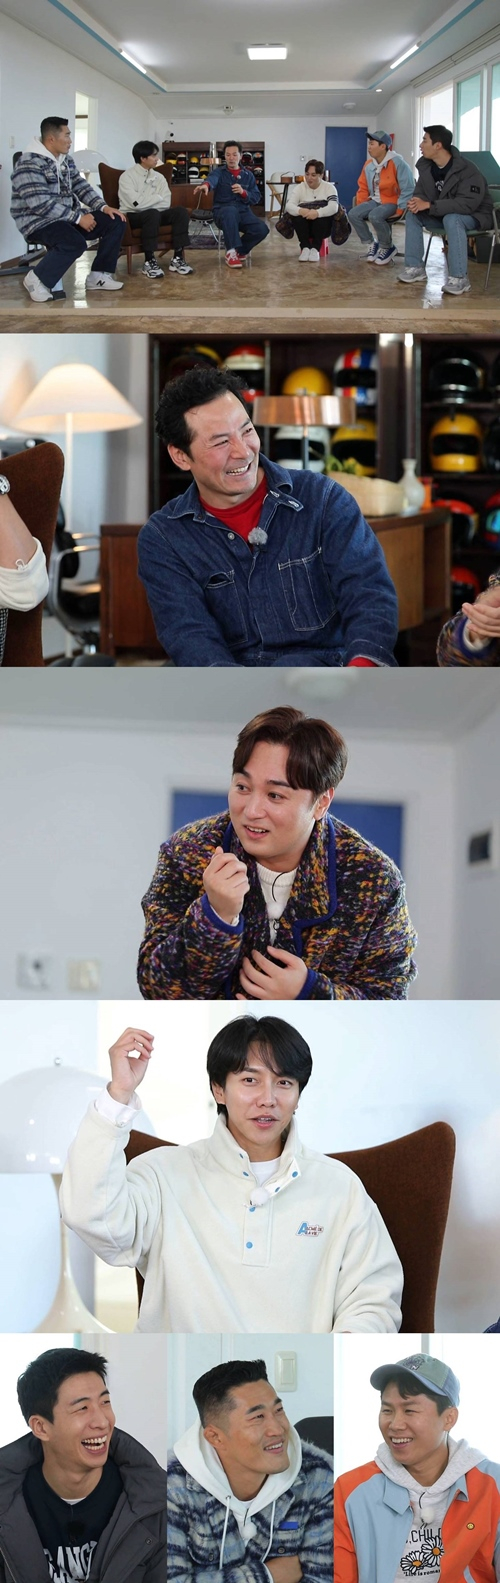 On the 28th SBS entertainment program All The Butlers, communication expert Kim Chang-ok appears as master.He will talk to the members of All The Butlers about communication.Recently, Lee Seung-gi, Yang Se-hyung, Kim Dong-Hyun and Yoo Soo-bin headed to Jeju Island with natural scenery to meet Koreas representative communication specialist Kim Chang-ok.The members who arrived at the house of Master Kim Chang-ok were amazed at the fantastic view and surprised by the extraordinary story of Master in Jeju Island.In addition, the comedian Emperor, who became a fan of Master Kim Chang-ok, appeared as a daily student on the day, and his lecture attracted attention by saying that his life changed.On this day, the members spent a special time in communication with Kim Chang-ok. The members were honest about the difficulties of communication that they could not tell anyone, and asked for advice from the master.In particular, Yoo Soo-bin led the sympathy by communicating with a friend who can experience it once, and Lee Seung-gi said, There is a relationship that feels that communication is difficult.Kim Chang-ok, as a King of Communication, has passed on a communication solution that can be useful for members as well as viewers.It is hoped that the disgrace story that the members first unveiled and Kim Chang-oks limited solution will be.